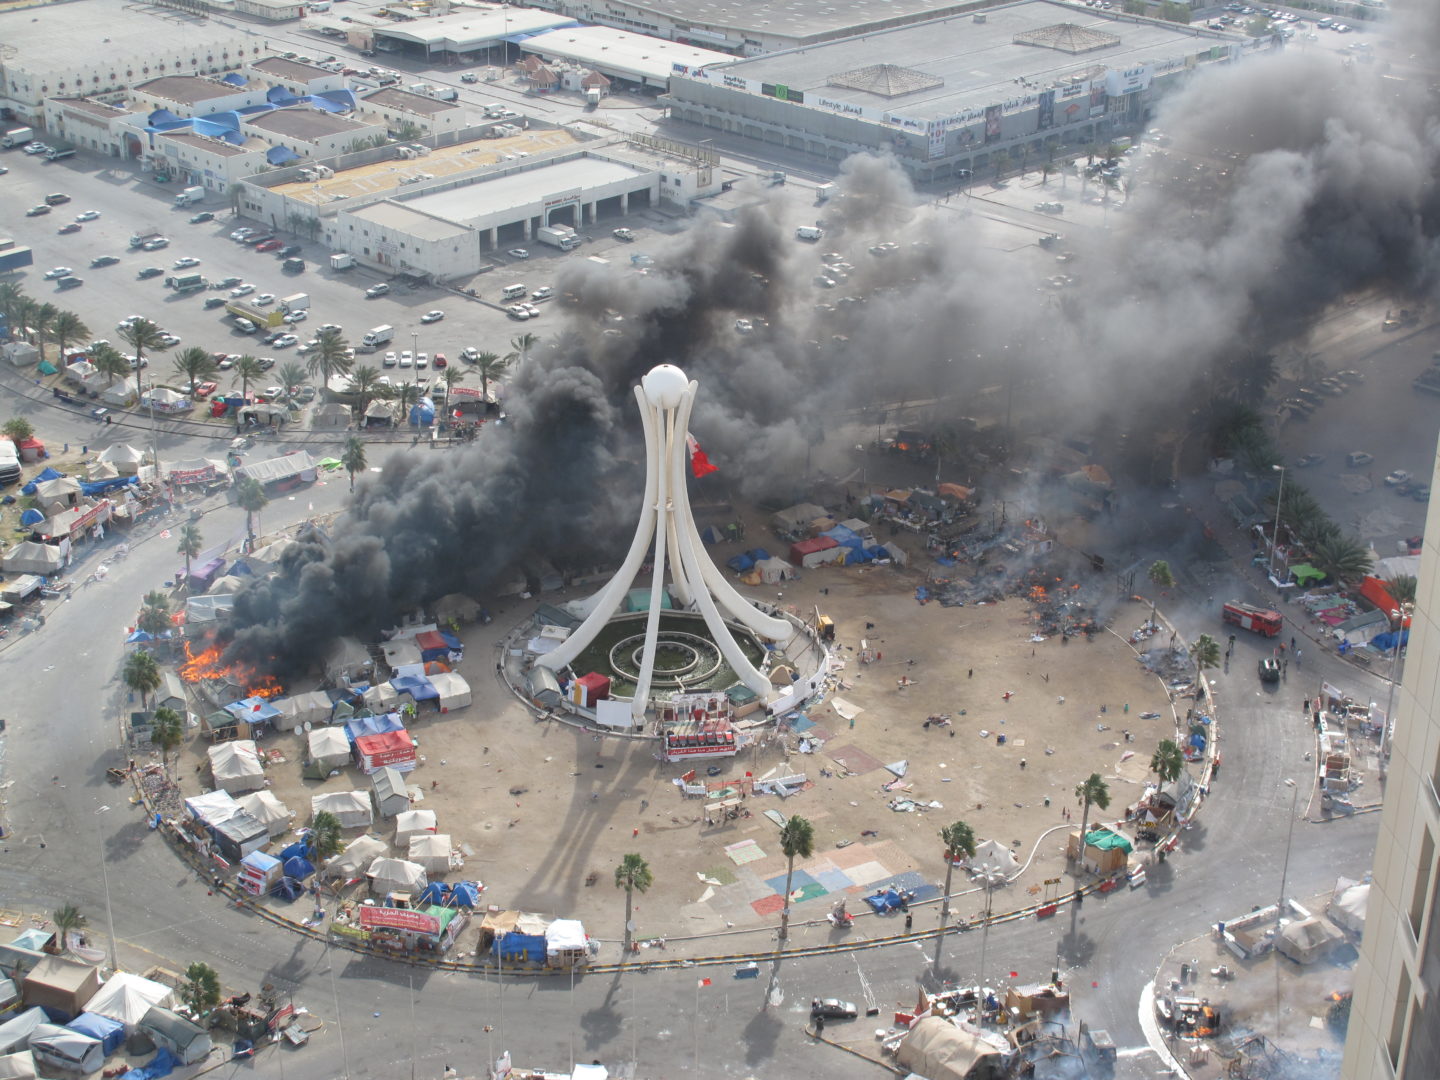 Tents burning as security forces storm Pearl Roundabout, Bahrain